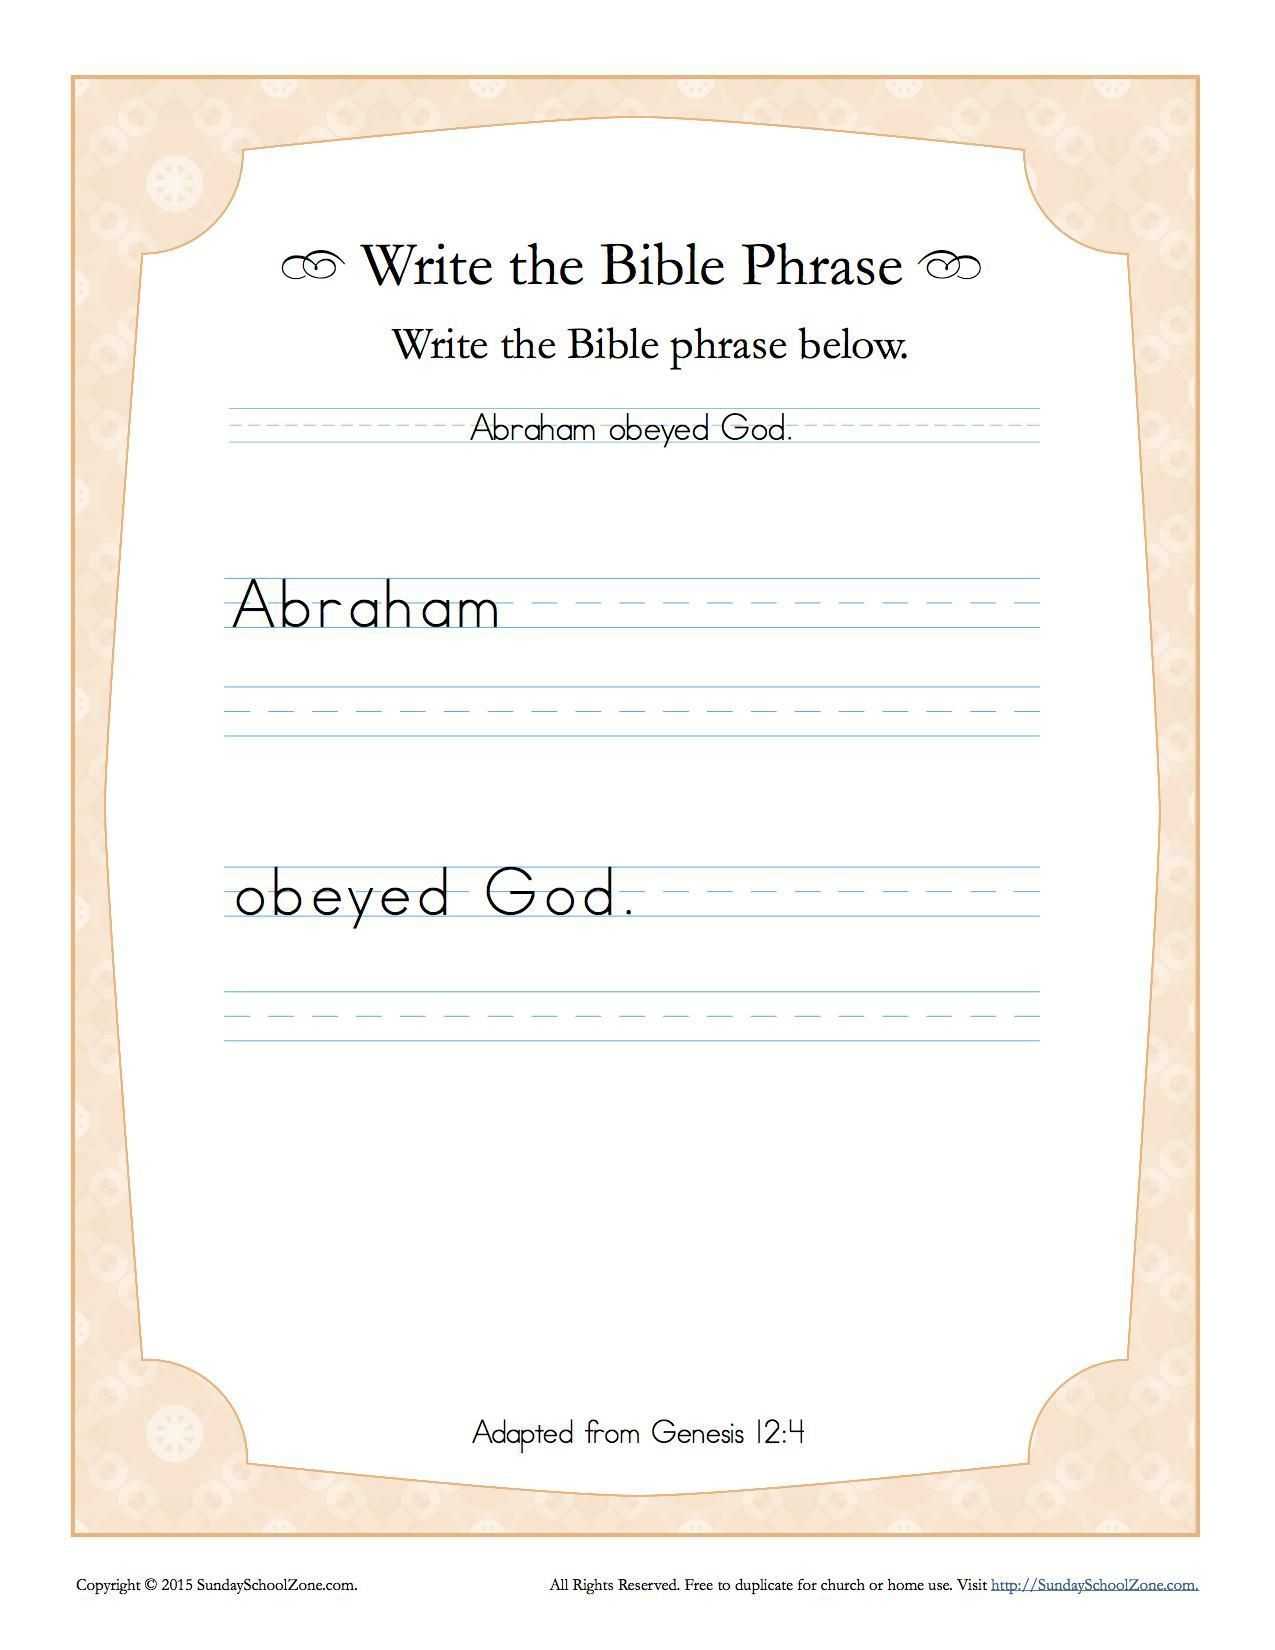 Free Printable Bible Study Worksheets and Children S Bible Worksheets Free